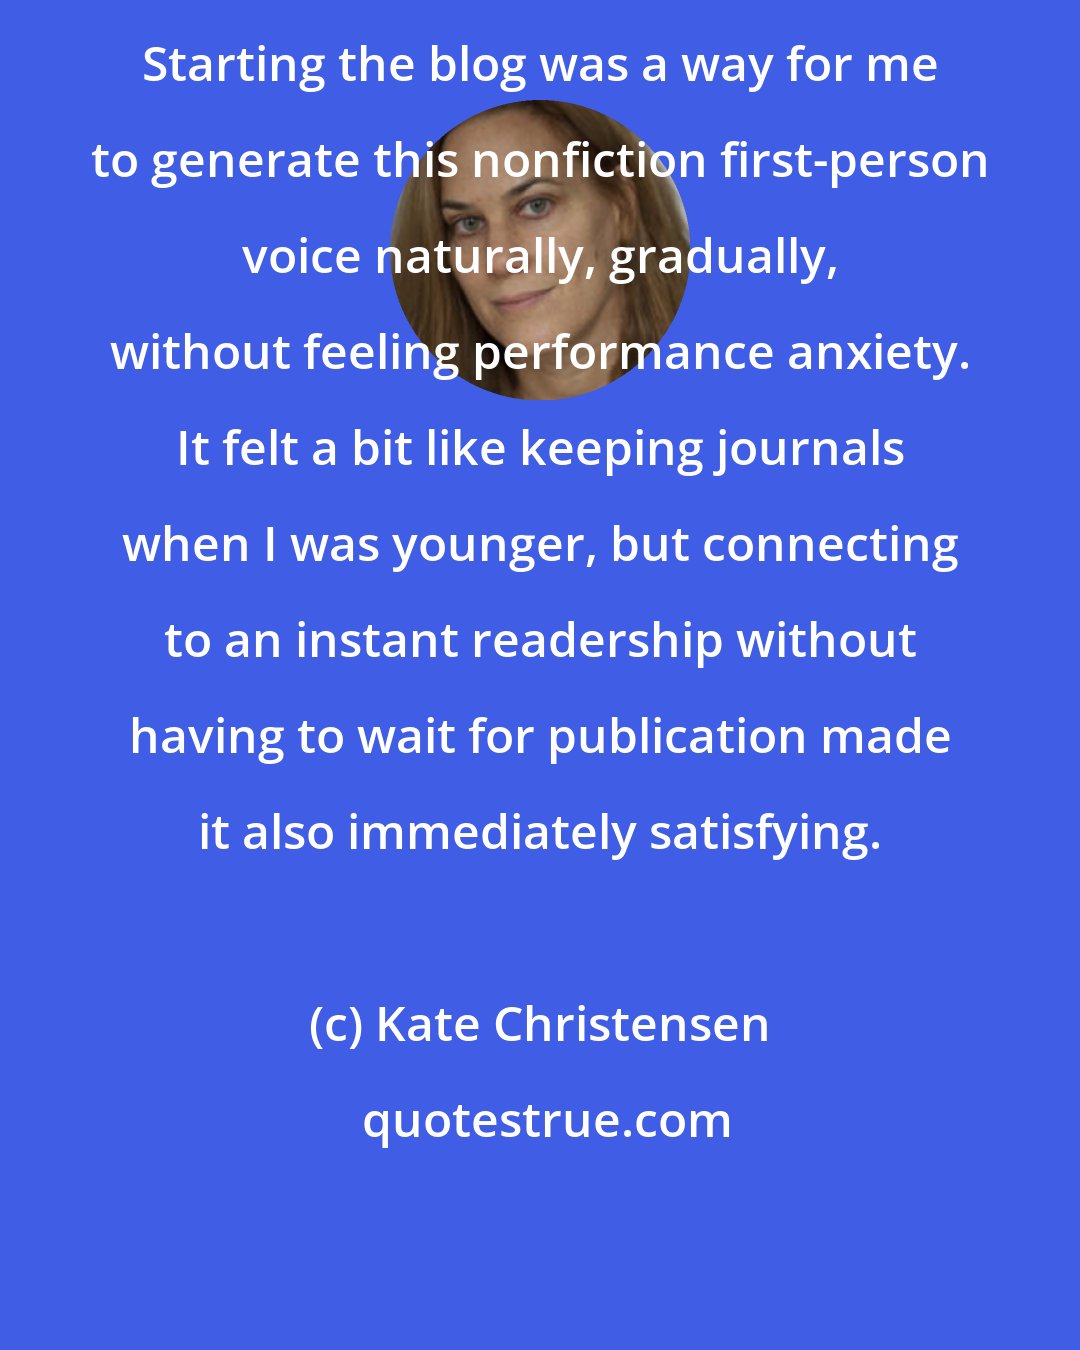 Kate Christensen: Starting the blog was a way for me to generate this nonfiction first-person voice naturally, gradually, without feeling performance anxiety. It felt a bit like keeping journals when I was younger, but connecting to an instant readership without having to wait for publication made it also immediately satisfying.